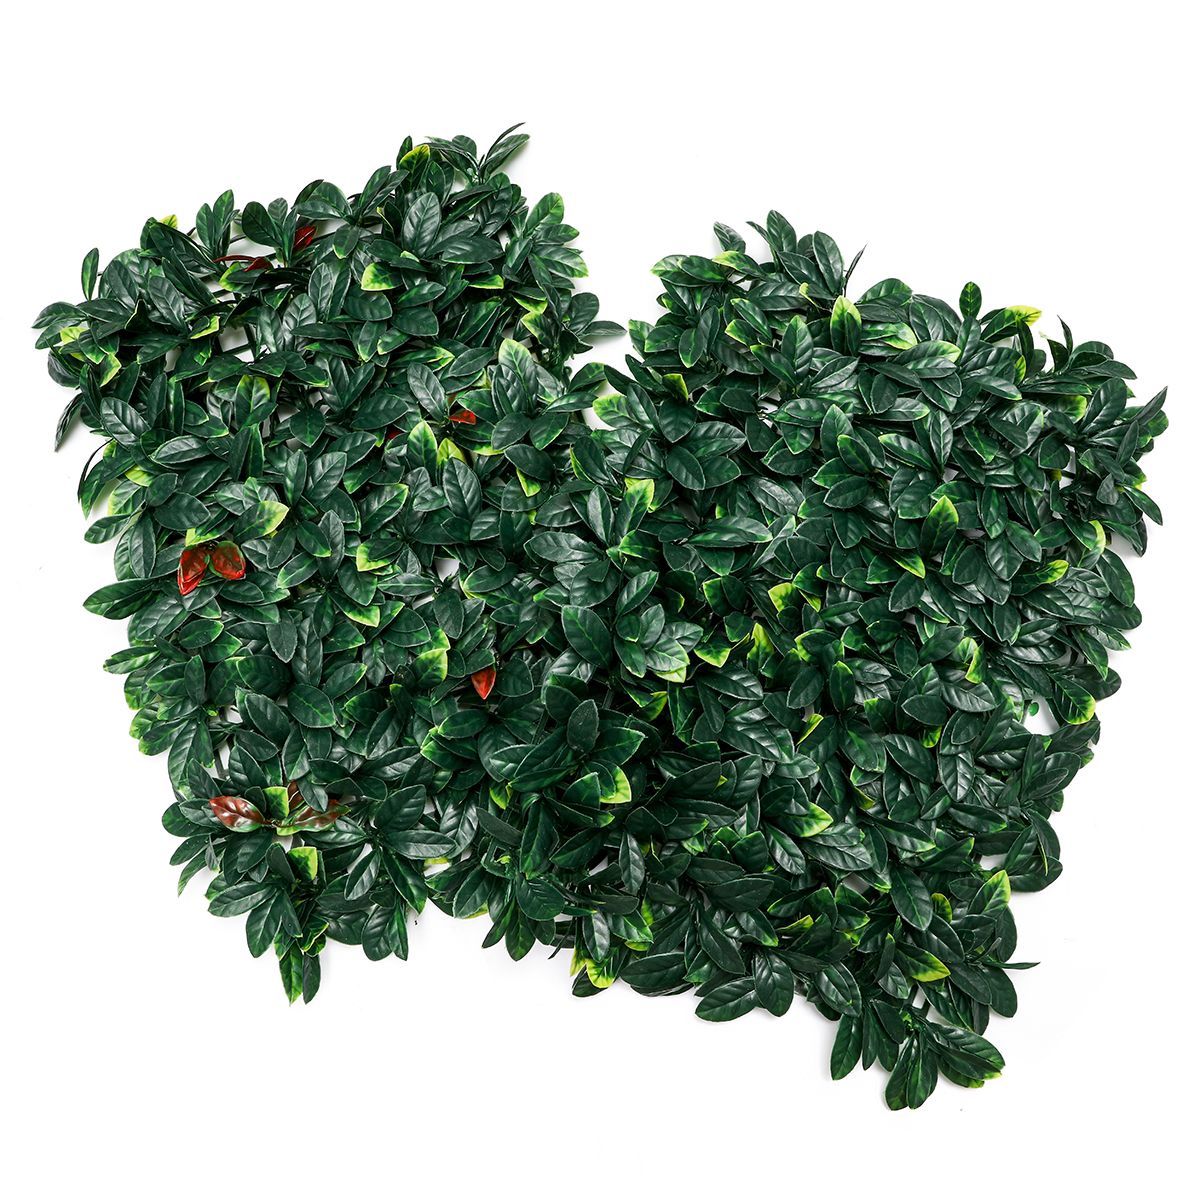 4060CM-Artificial-Topiary-Hedges-Panels-Plastic-Faux-Shrubs-Fence-Mat-Greenery-Wall-Backdrop-Decor-G-1729461